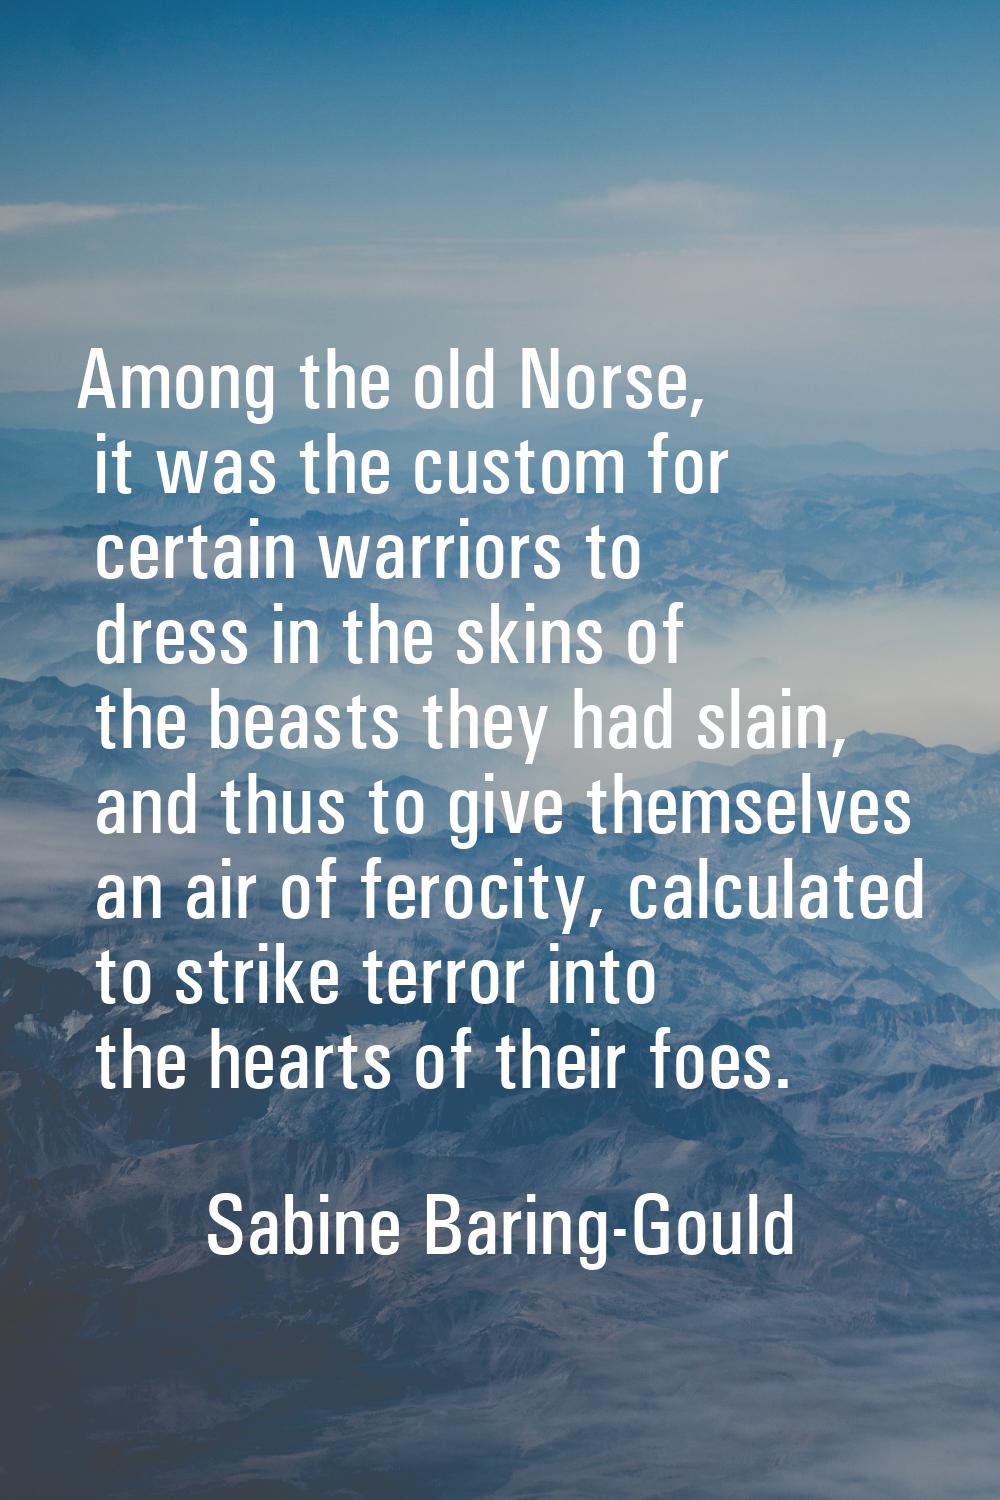 Among the old Norse, it was the custom for certain warriors to dress in the skins of the beasts the